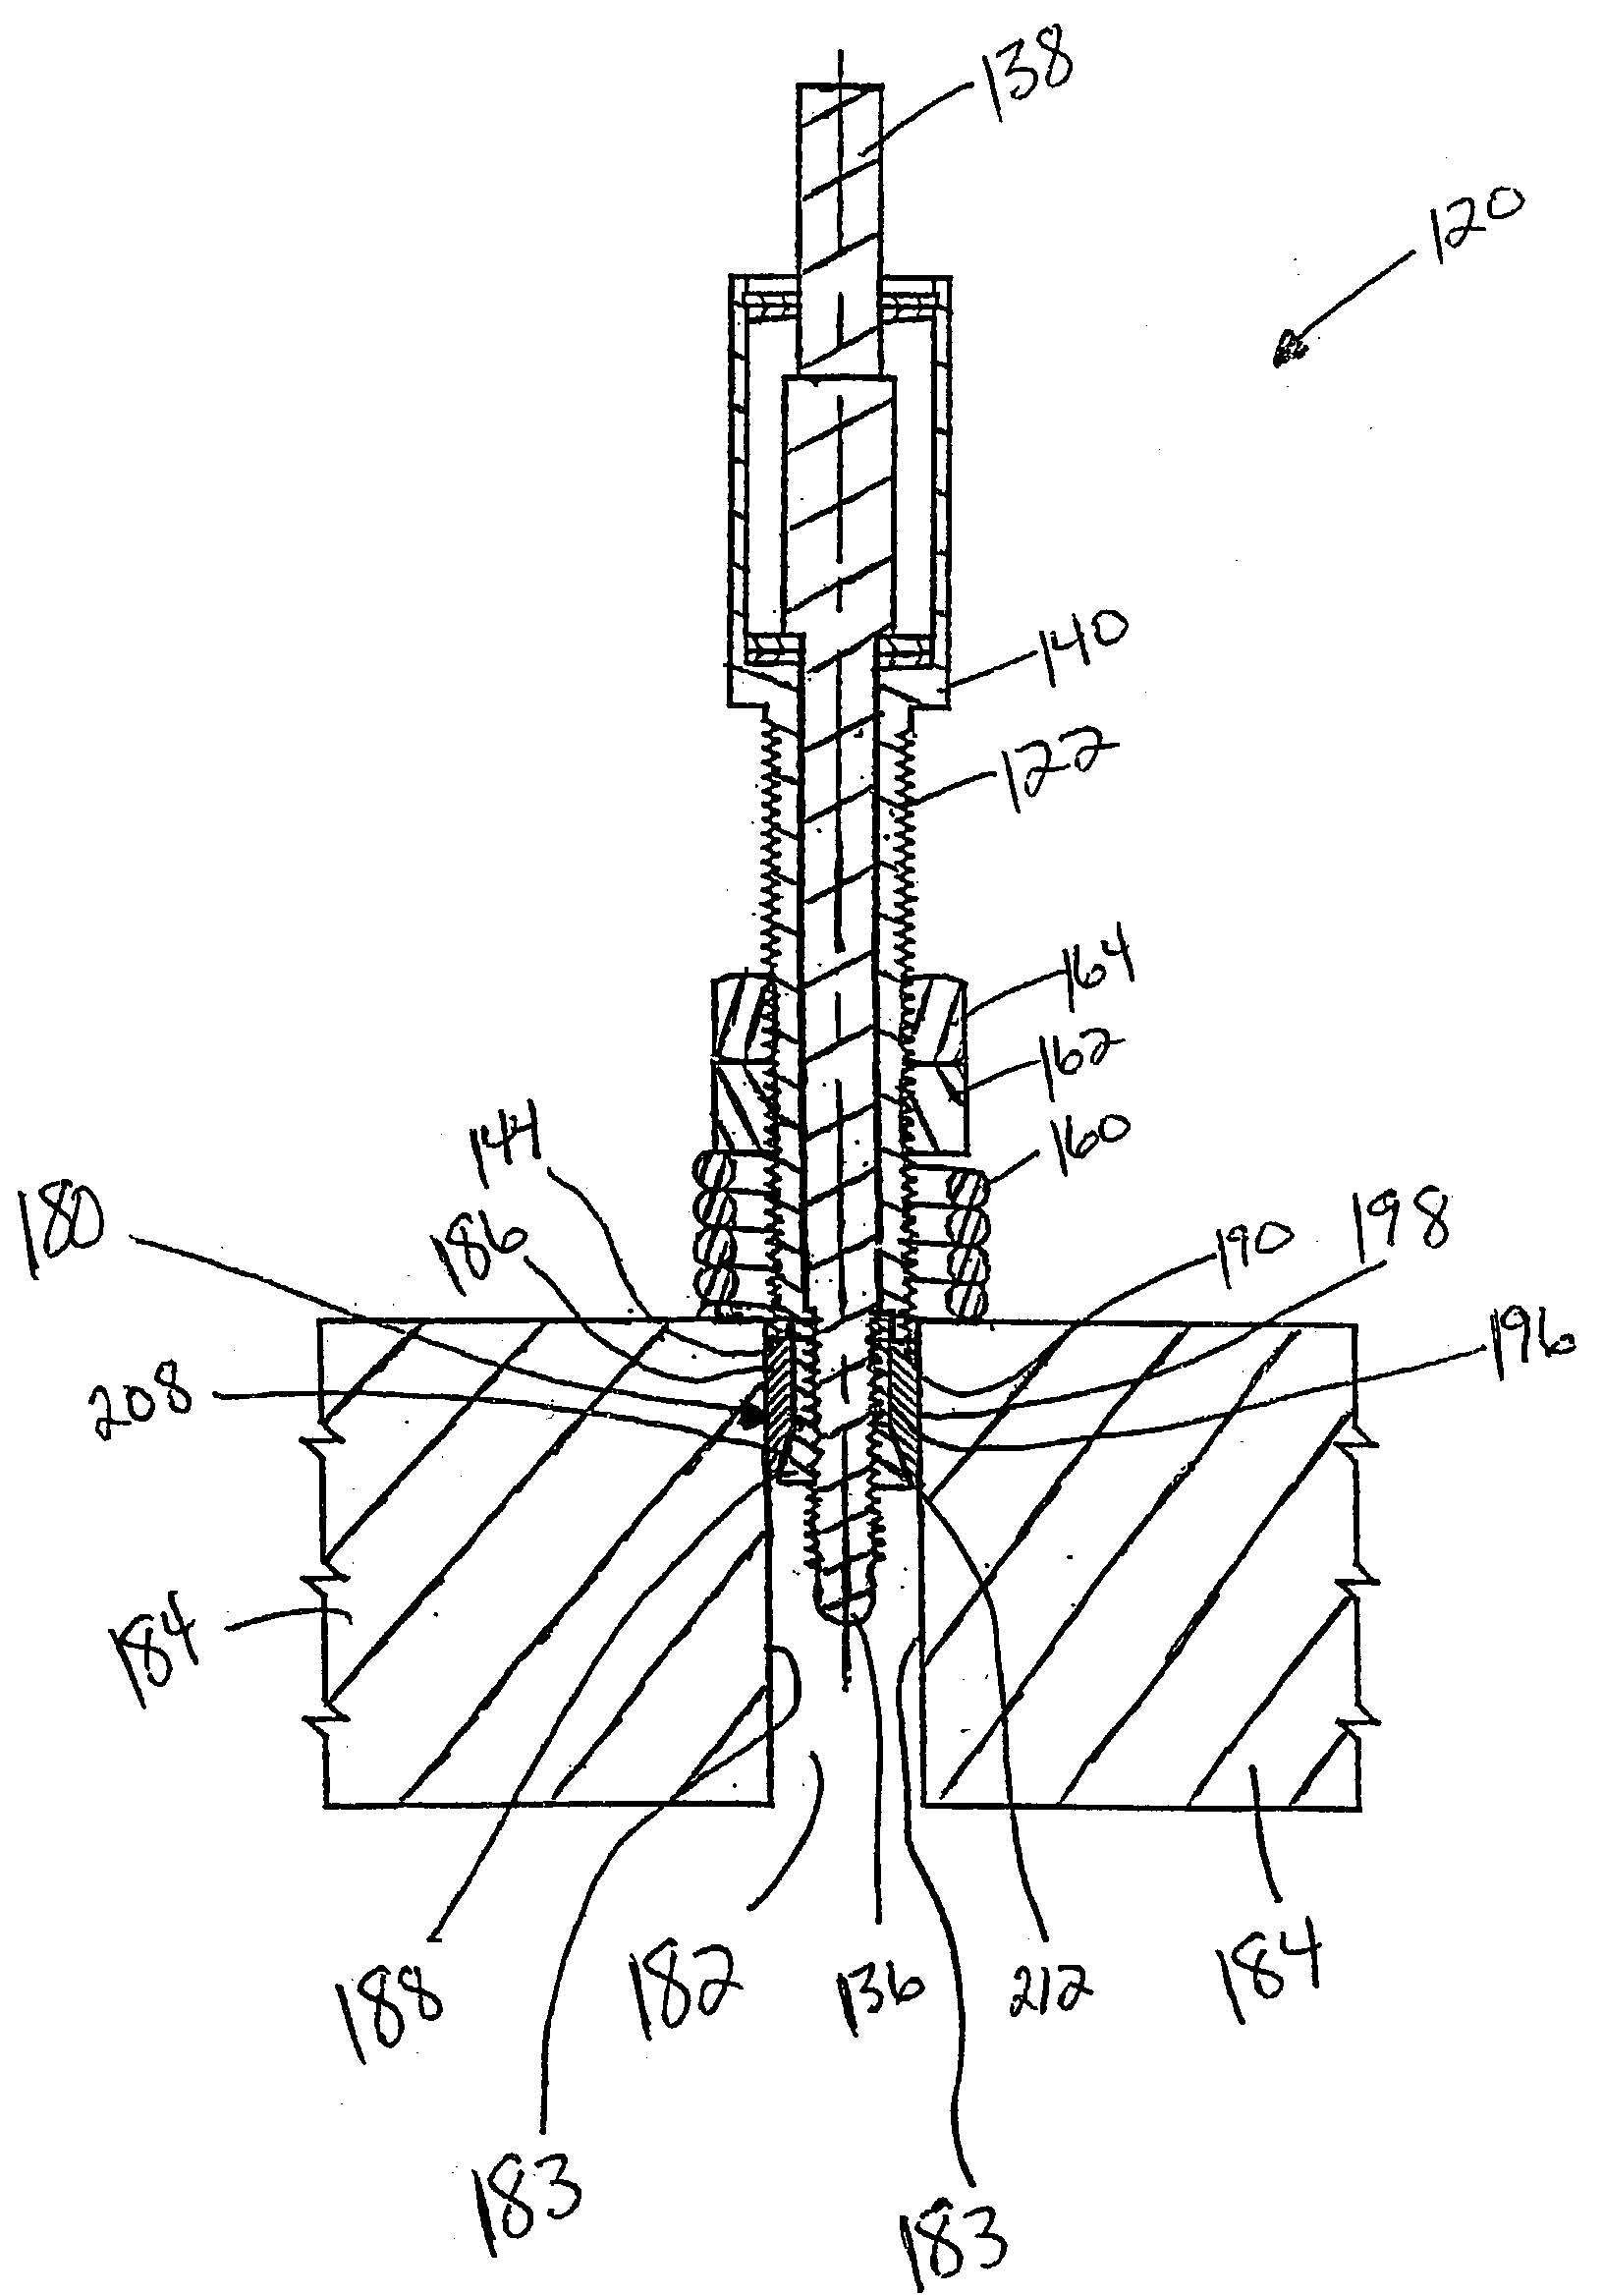 Installation tool for setting anchors